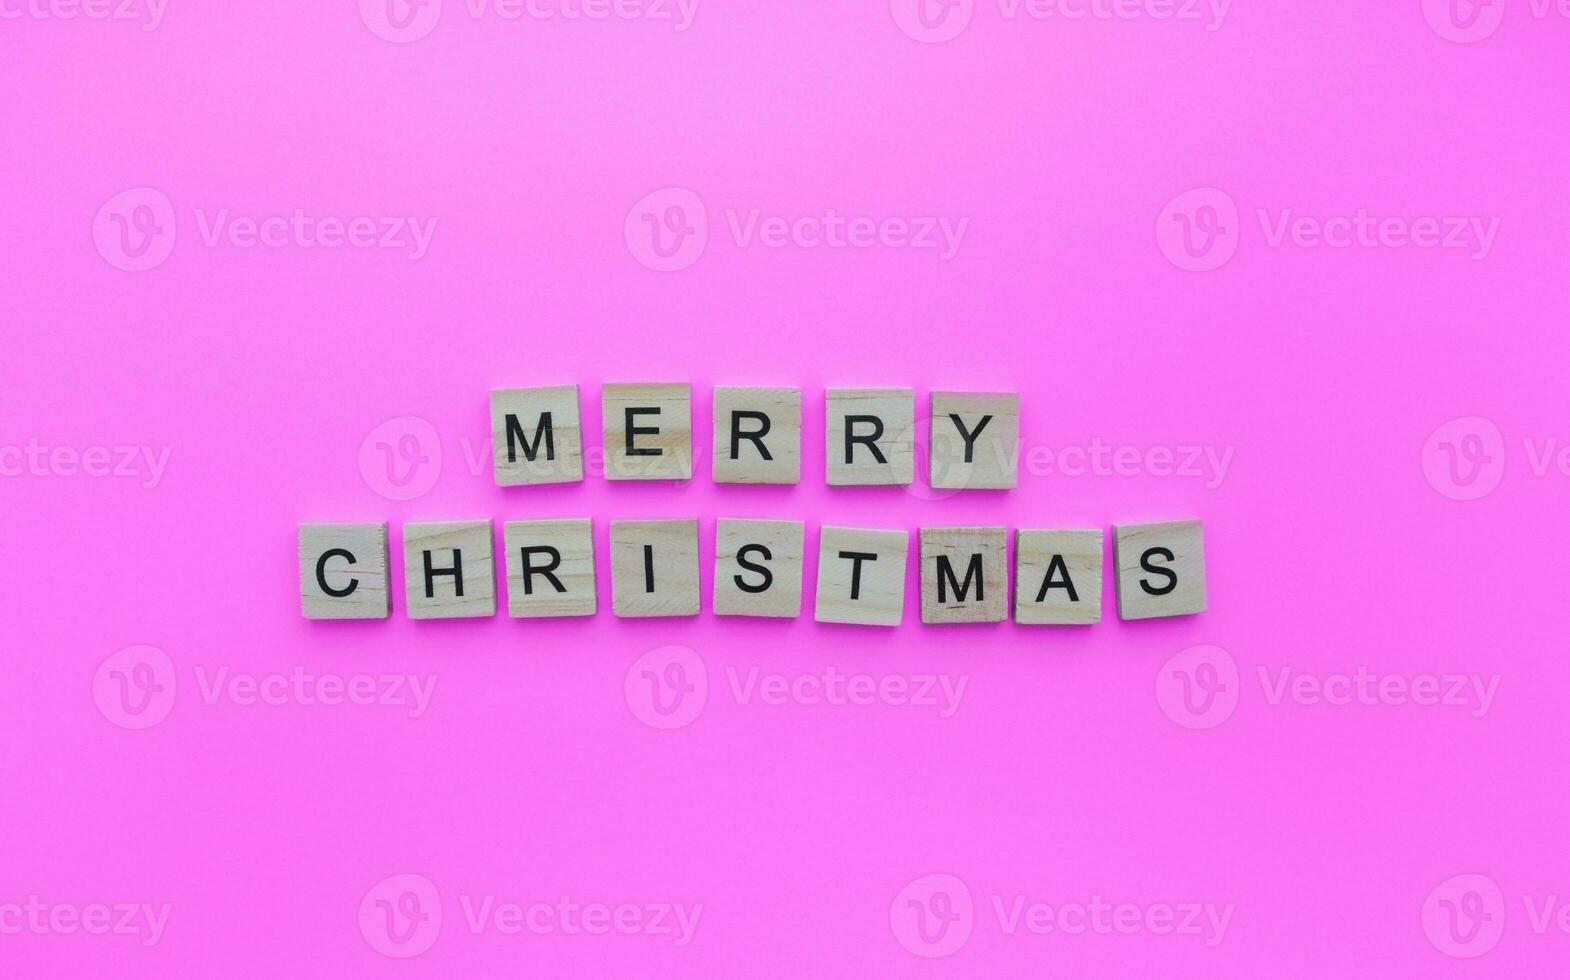 December 25, Christmas, minimalistic banner with the inscription in wooden letters on a pink background photo